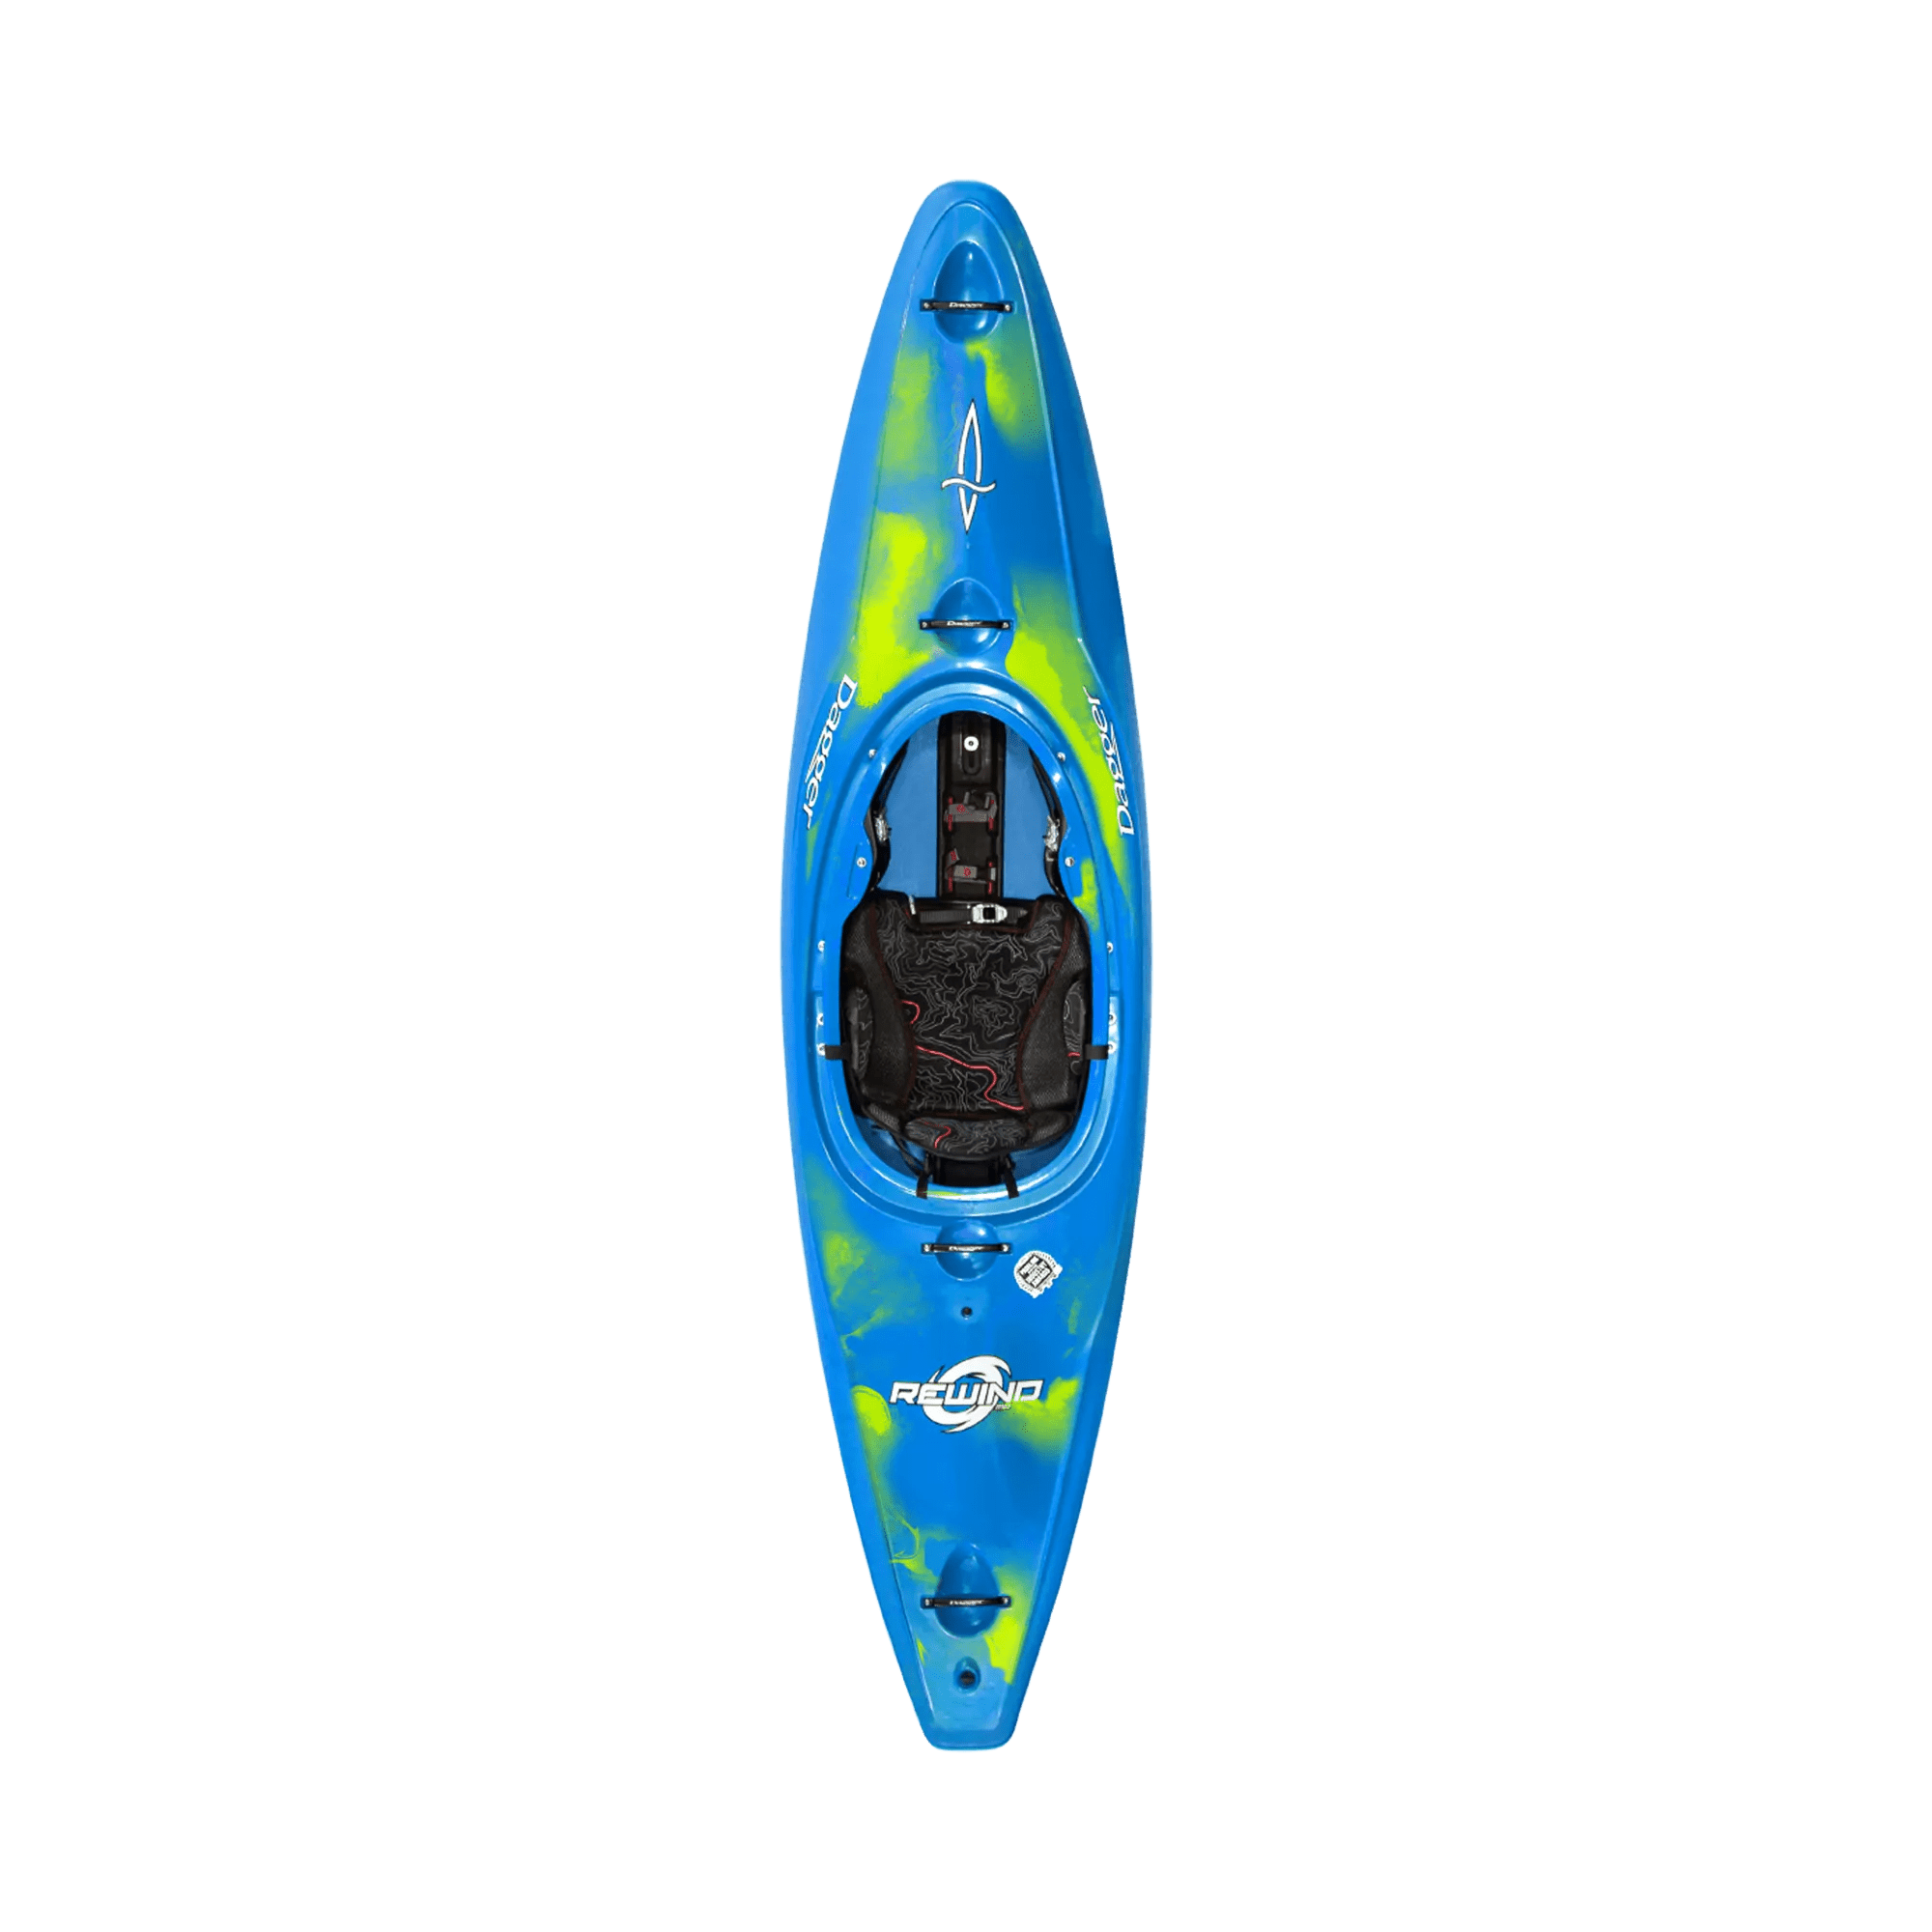 DAGGER - Rewind L River Play Whitewater Kayak - Blue - 9010480197 - TOP 